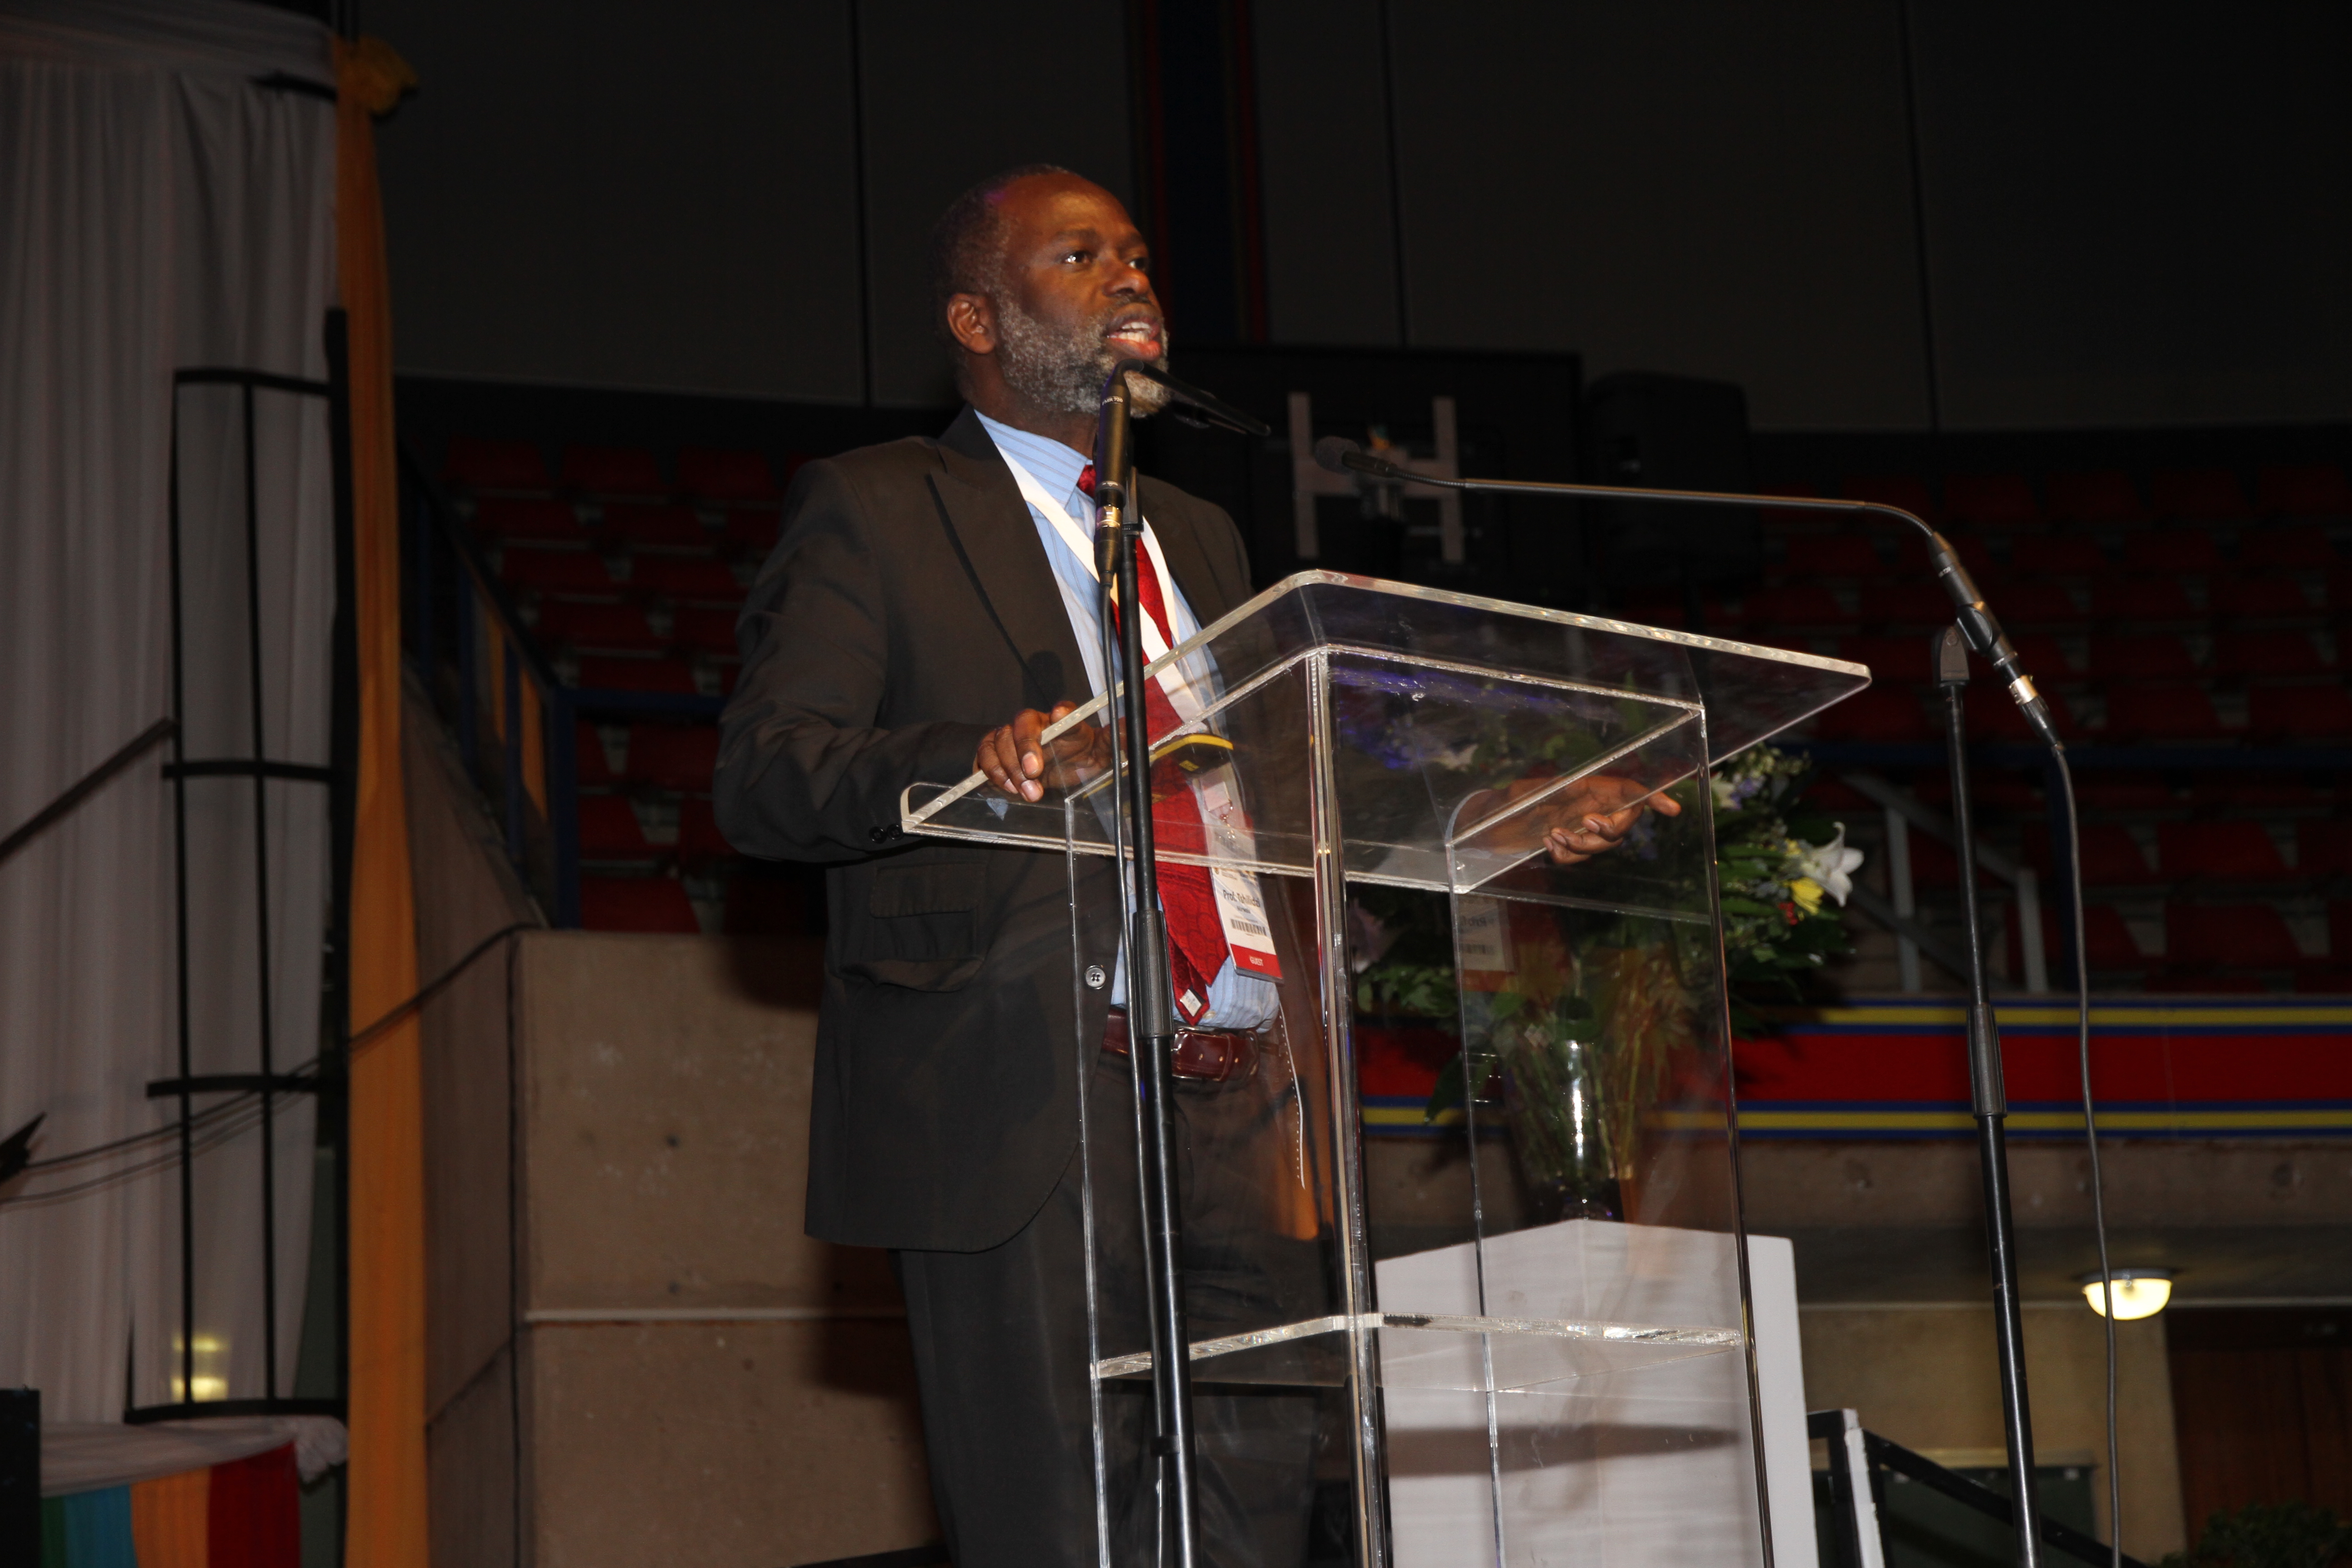 Prof. Tshilidzi Marwala, Vice Chancellor of the University of Johannesburg, who delivered the keynote lecture focused on Africa and the Fourth Industrial Revolution (FIR).